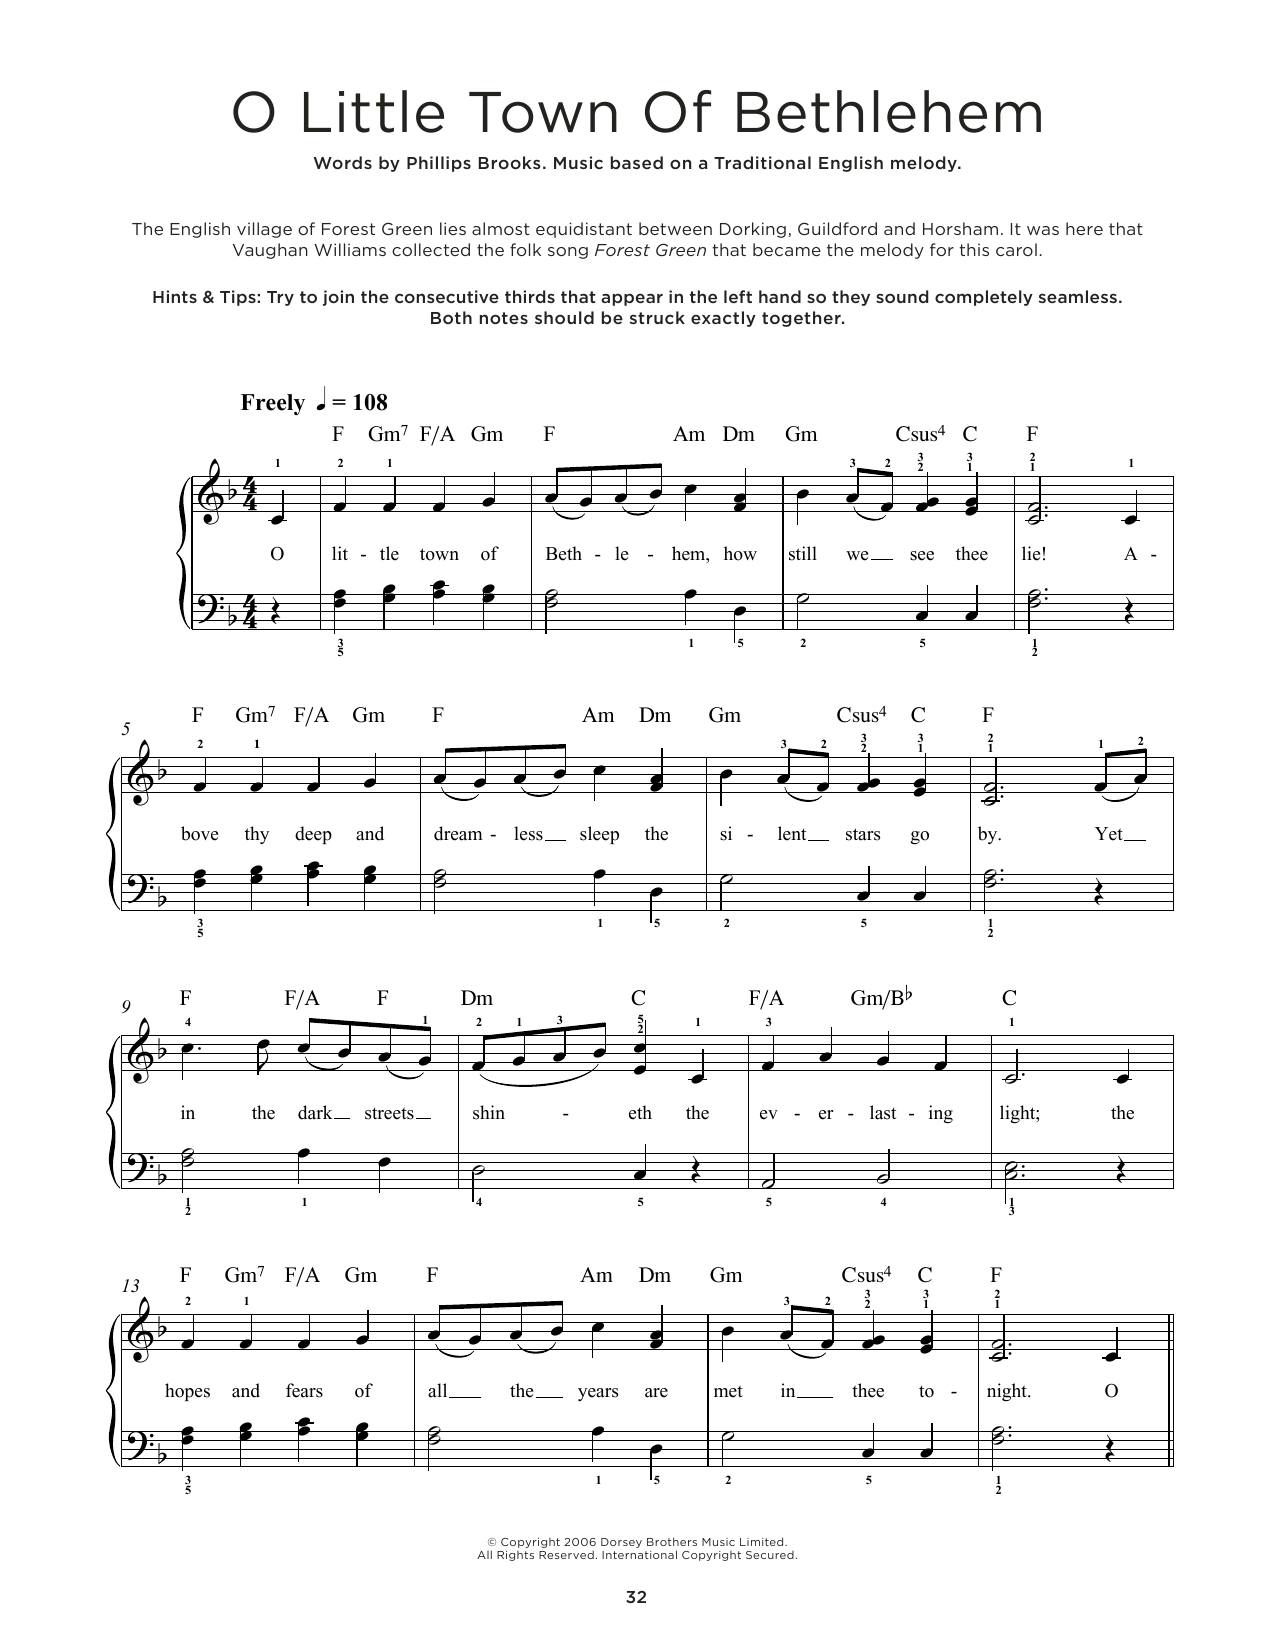 Download Traditional English Melody O Little Town Of Bethlehem Sheet Music